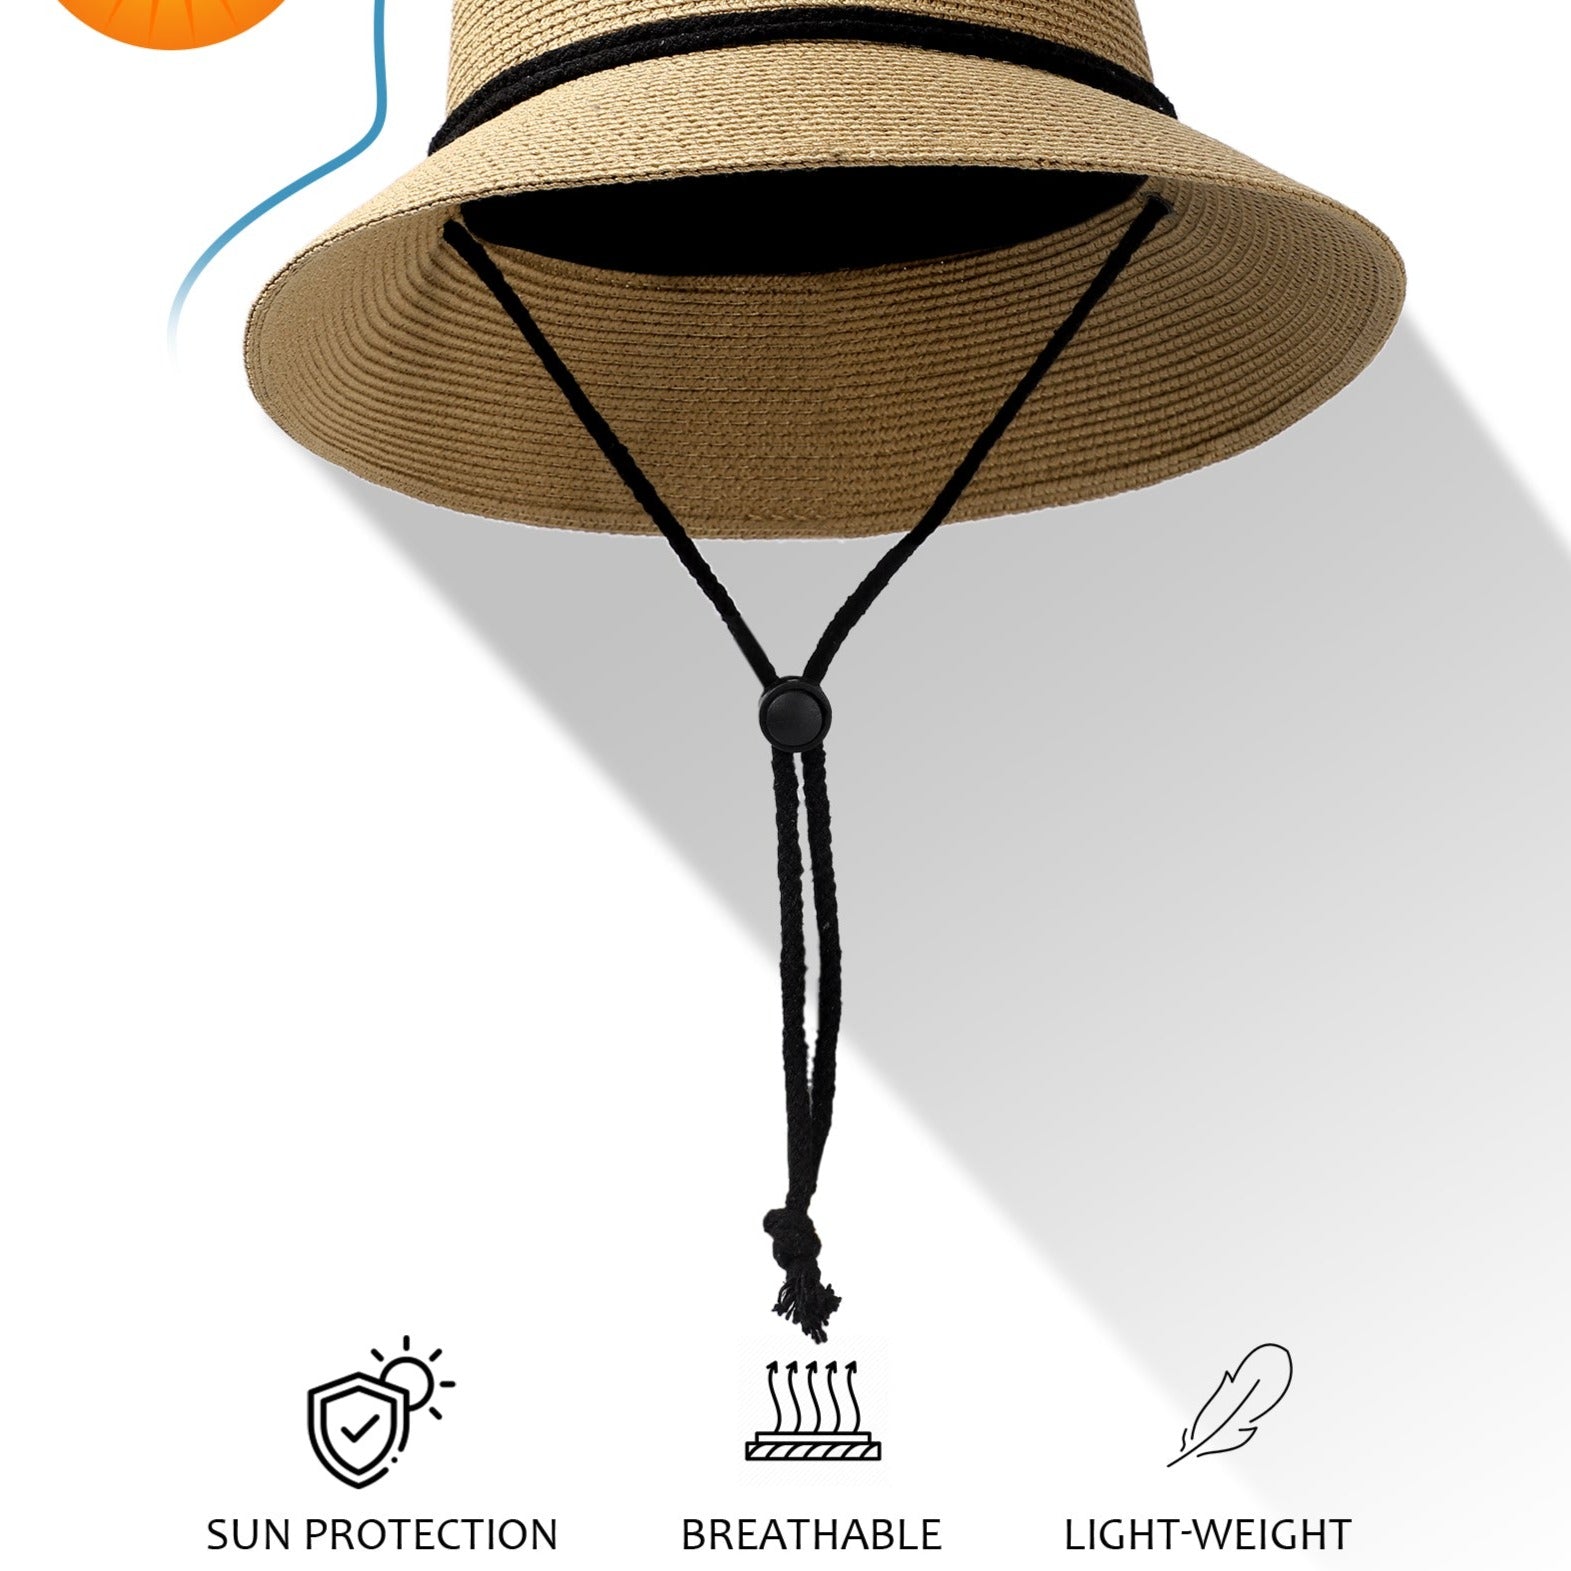 Foldable Straw Sun Hats For Men Fishing Hat Hiking Hat Large Brim Beach Hat  Summer Sunhat Fold Up For Outdoor Travel Garden H6Y8